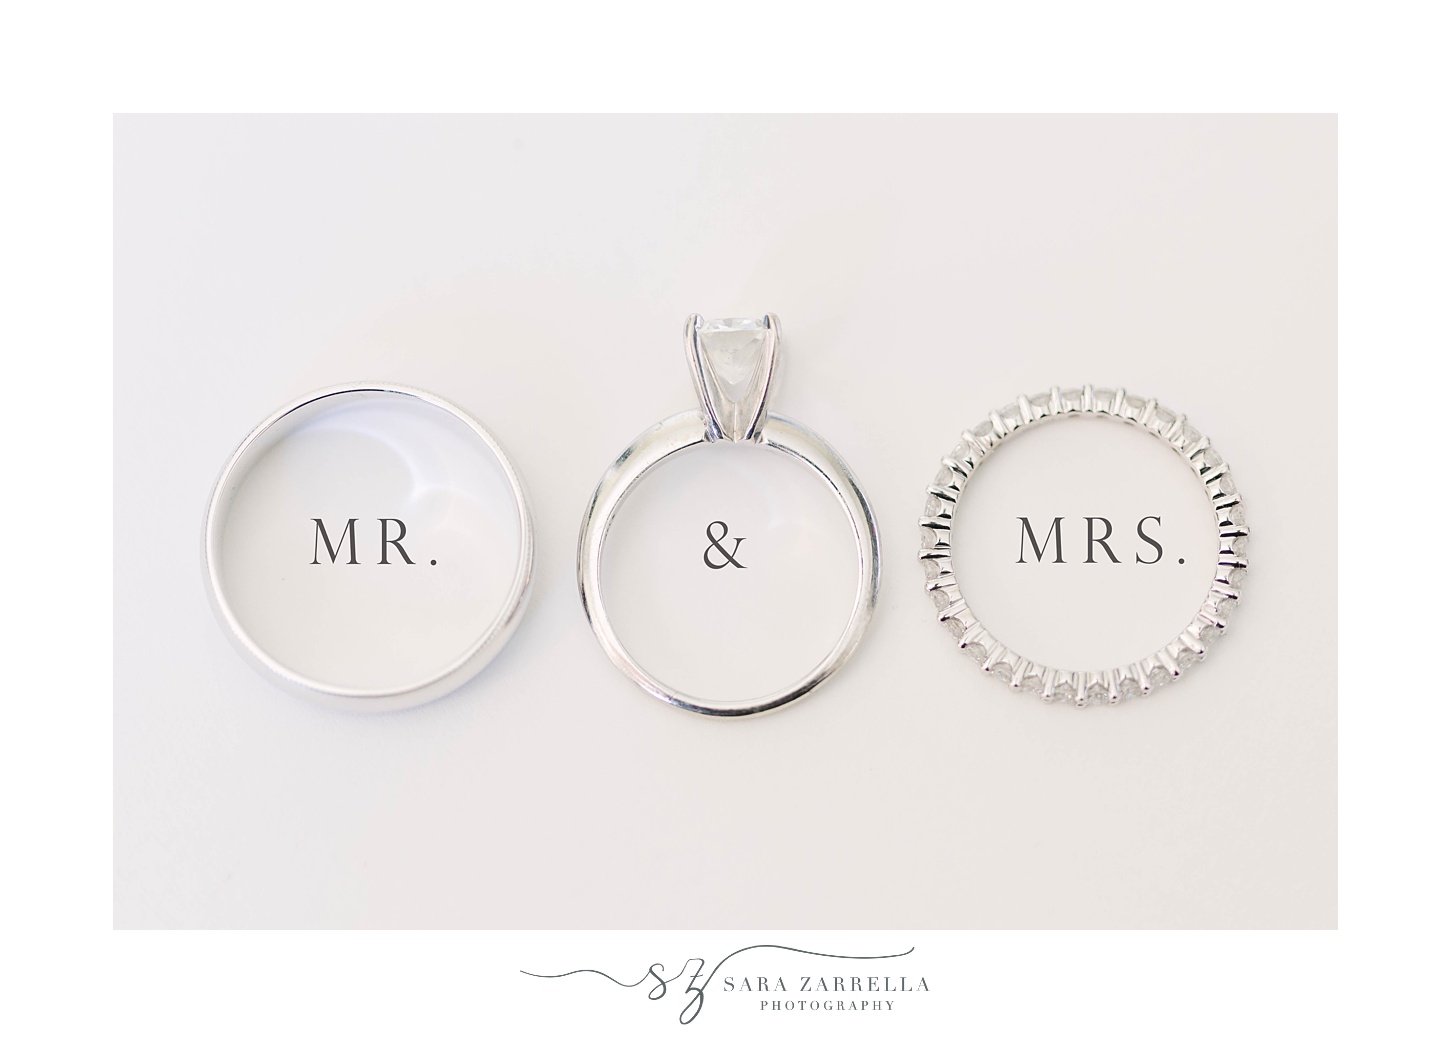 wedding rings lay on white table with Mr. and Mrs. underneath rings